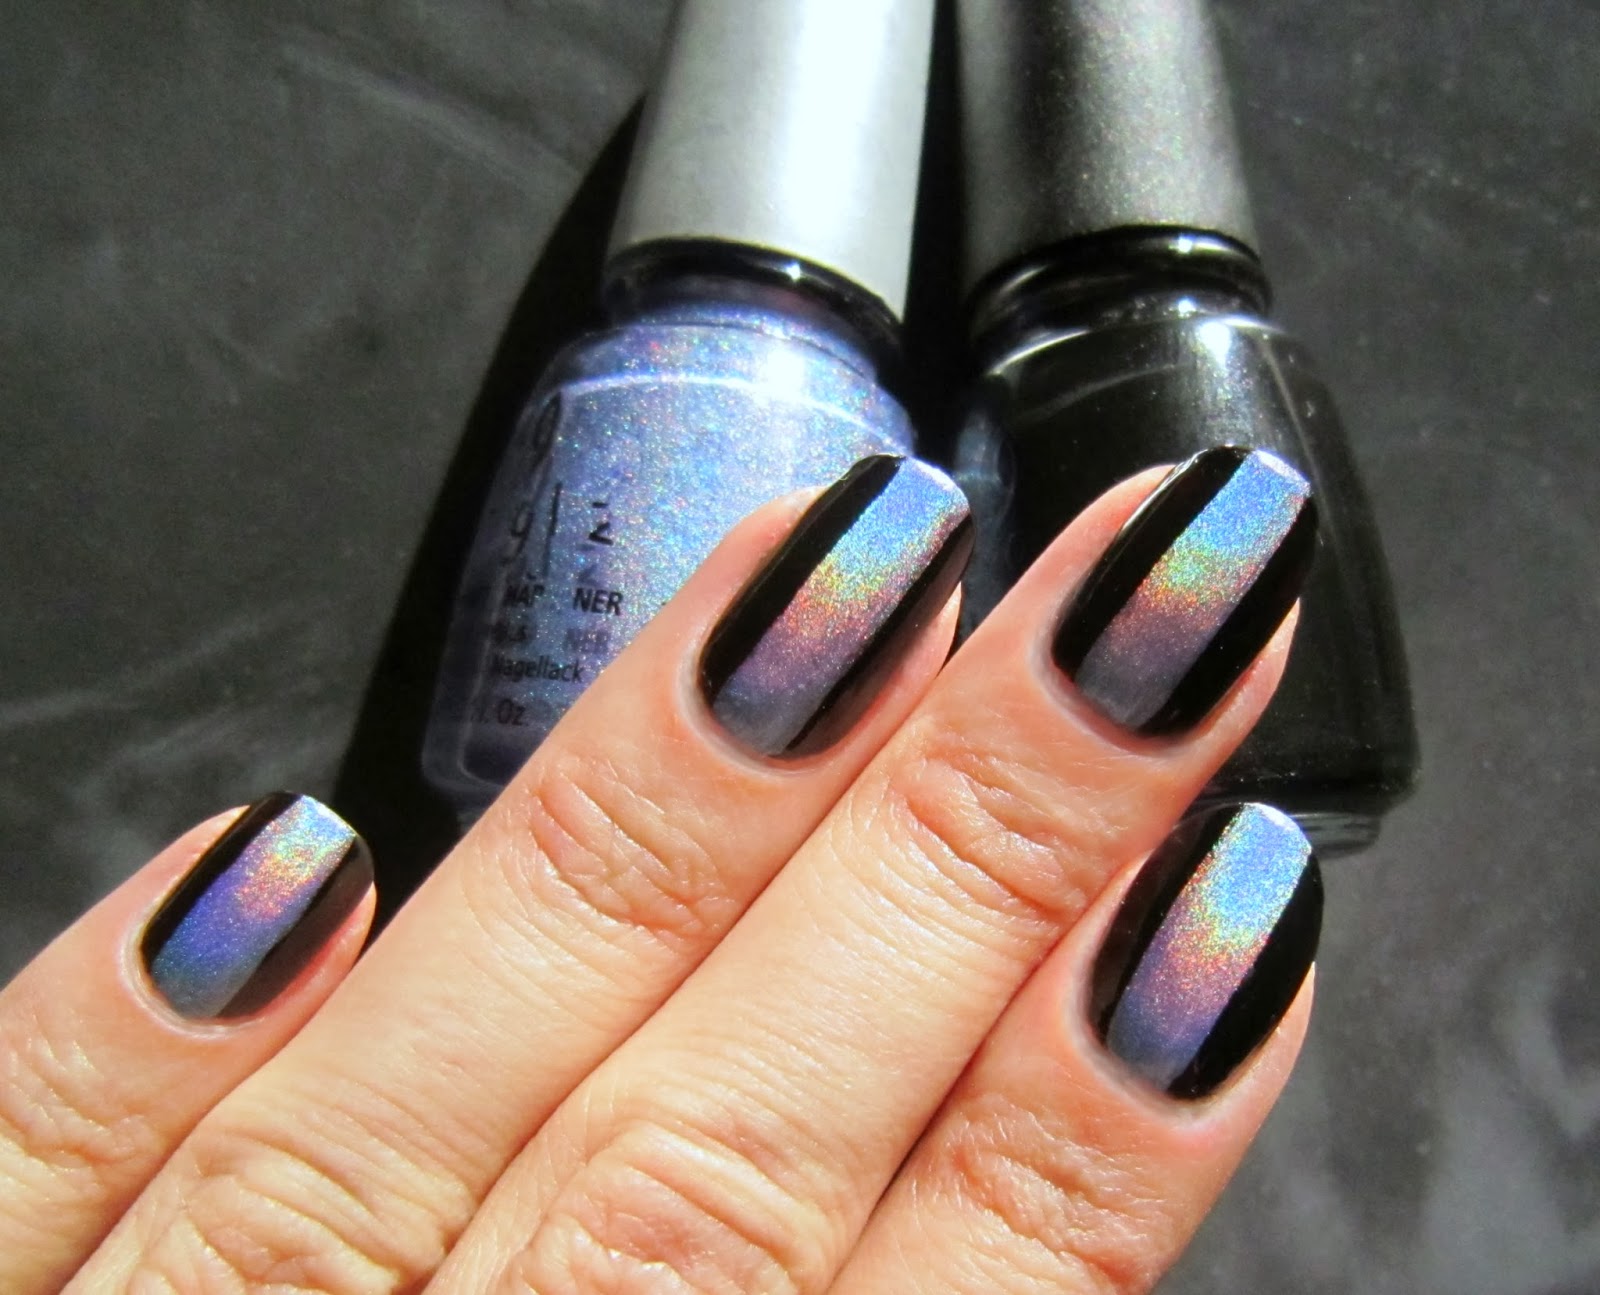 4. China Glaze Nail Lacquer in "Liquid Leather" - wide 7